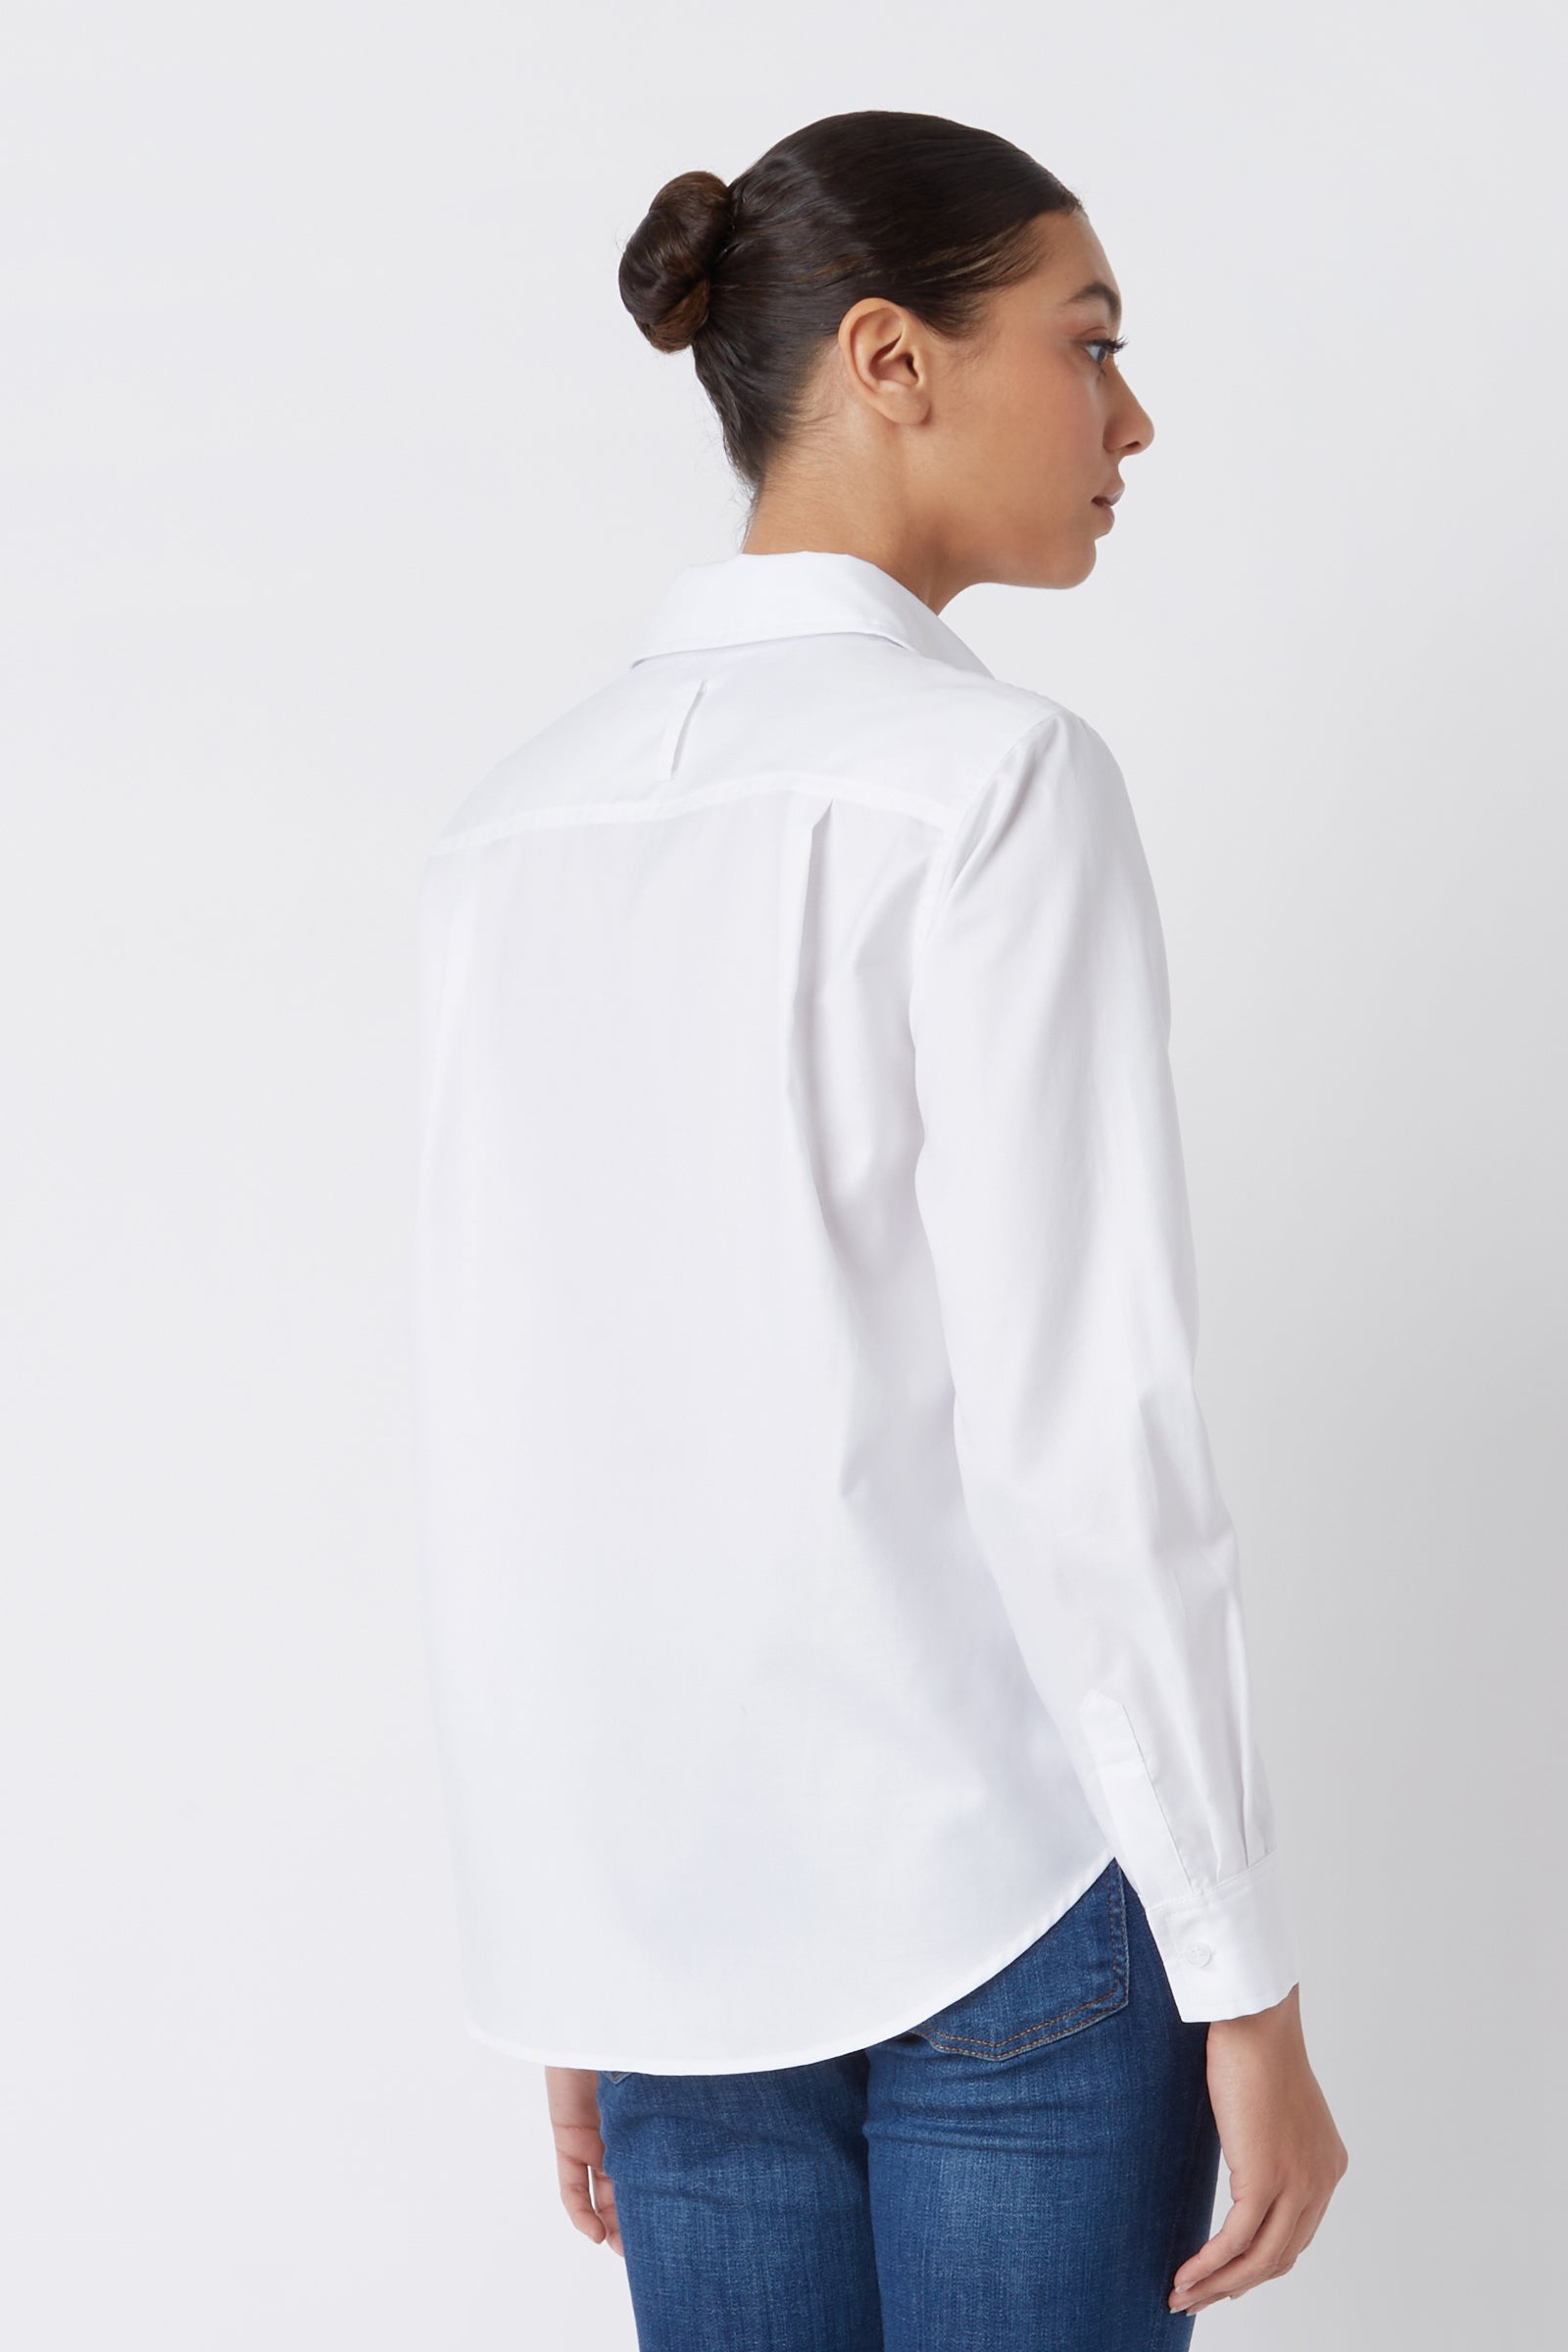 Kal Rieman Classic Tailored Shirt in White Stretch on Model Cropped Back View